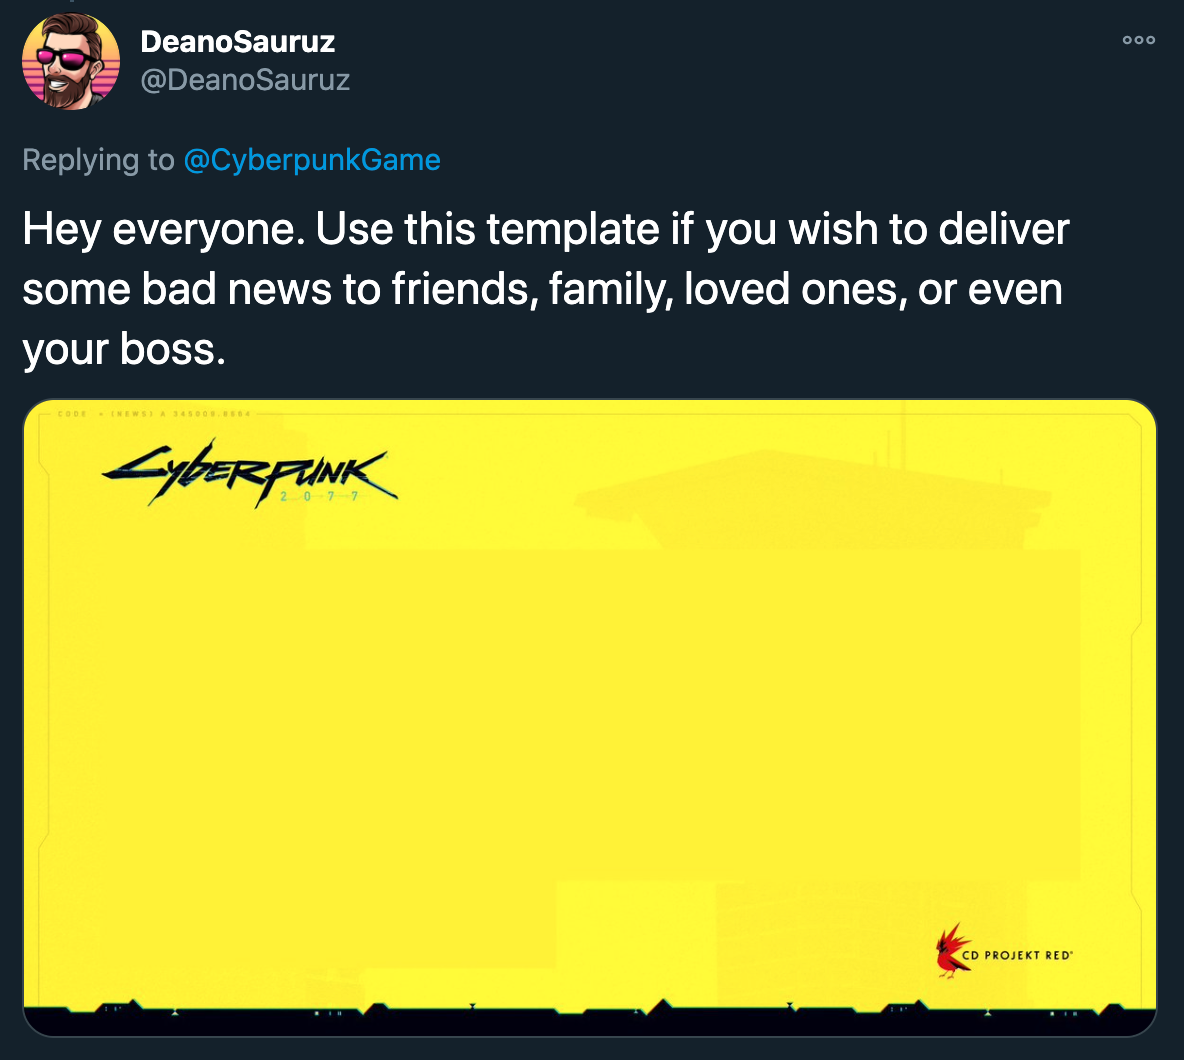 cyberpunk 2077 delay - Hey everyone. Use this template if you wish to deliver some bad news to friends, family, loved ones, or even your boss.